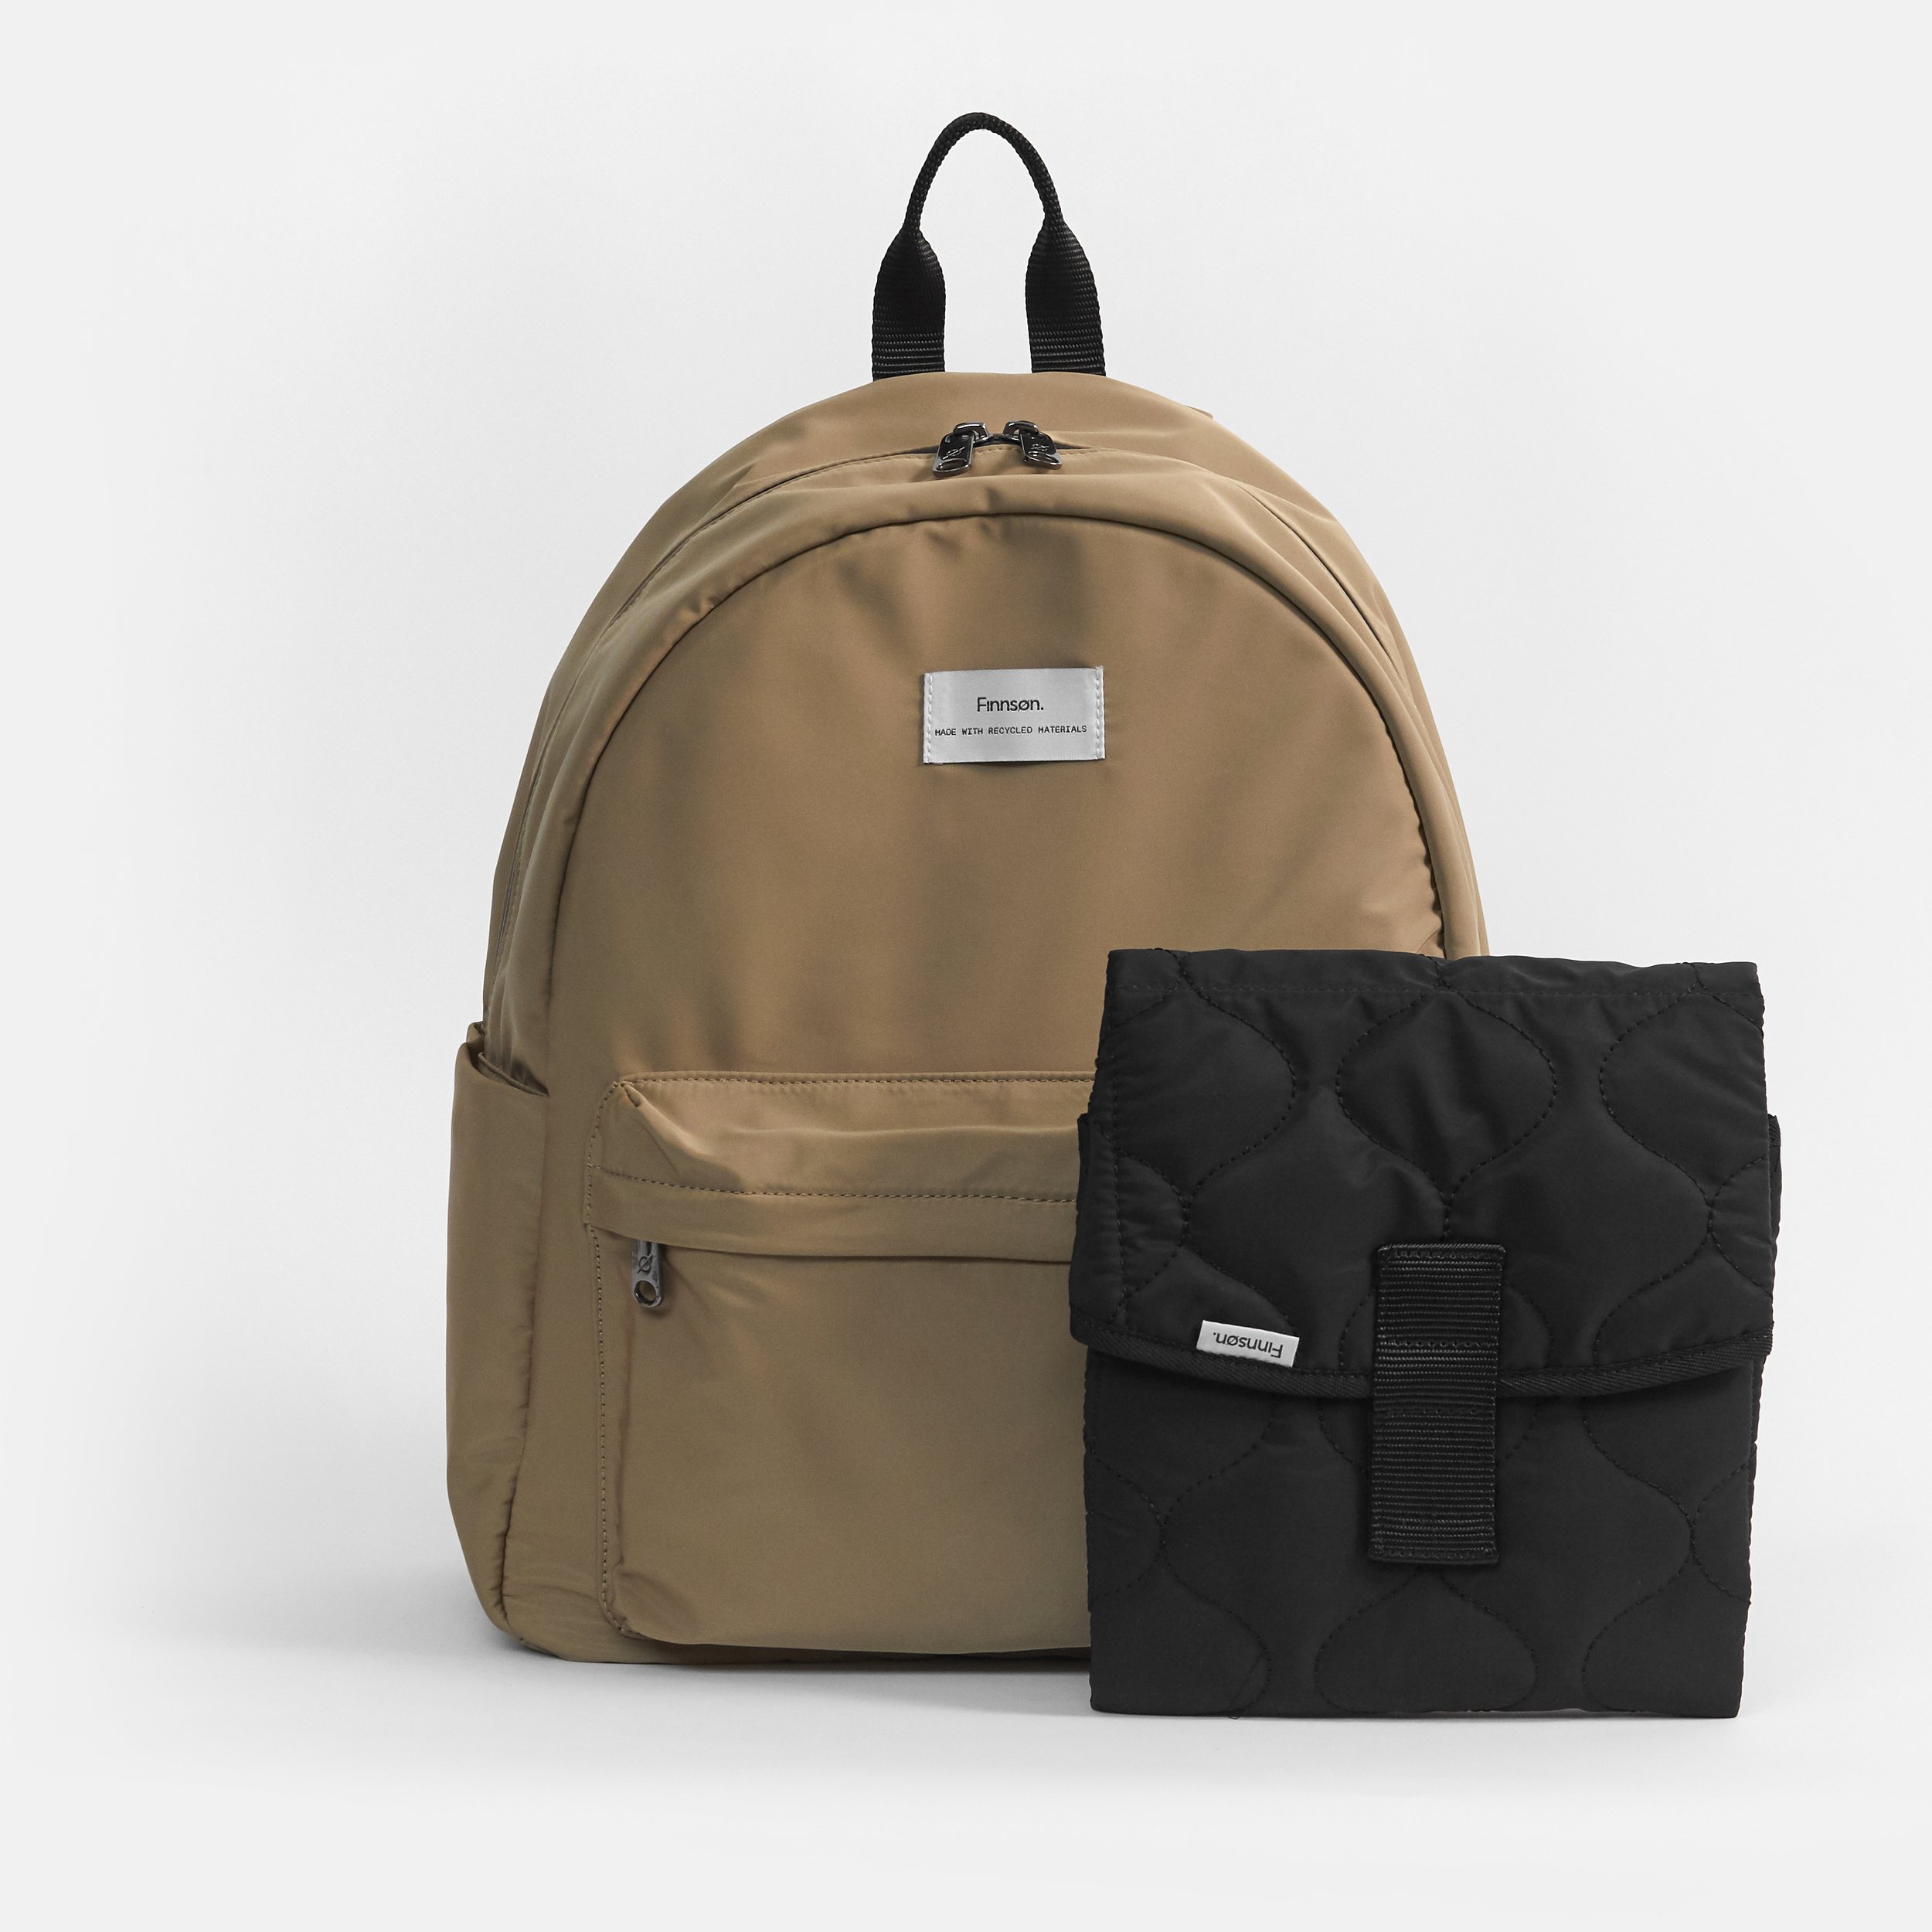 FINNSON ANA Eco Changing Backpack-CAMEL 4.jpg